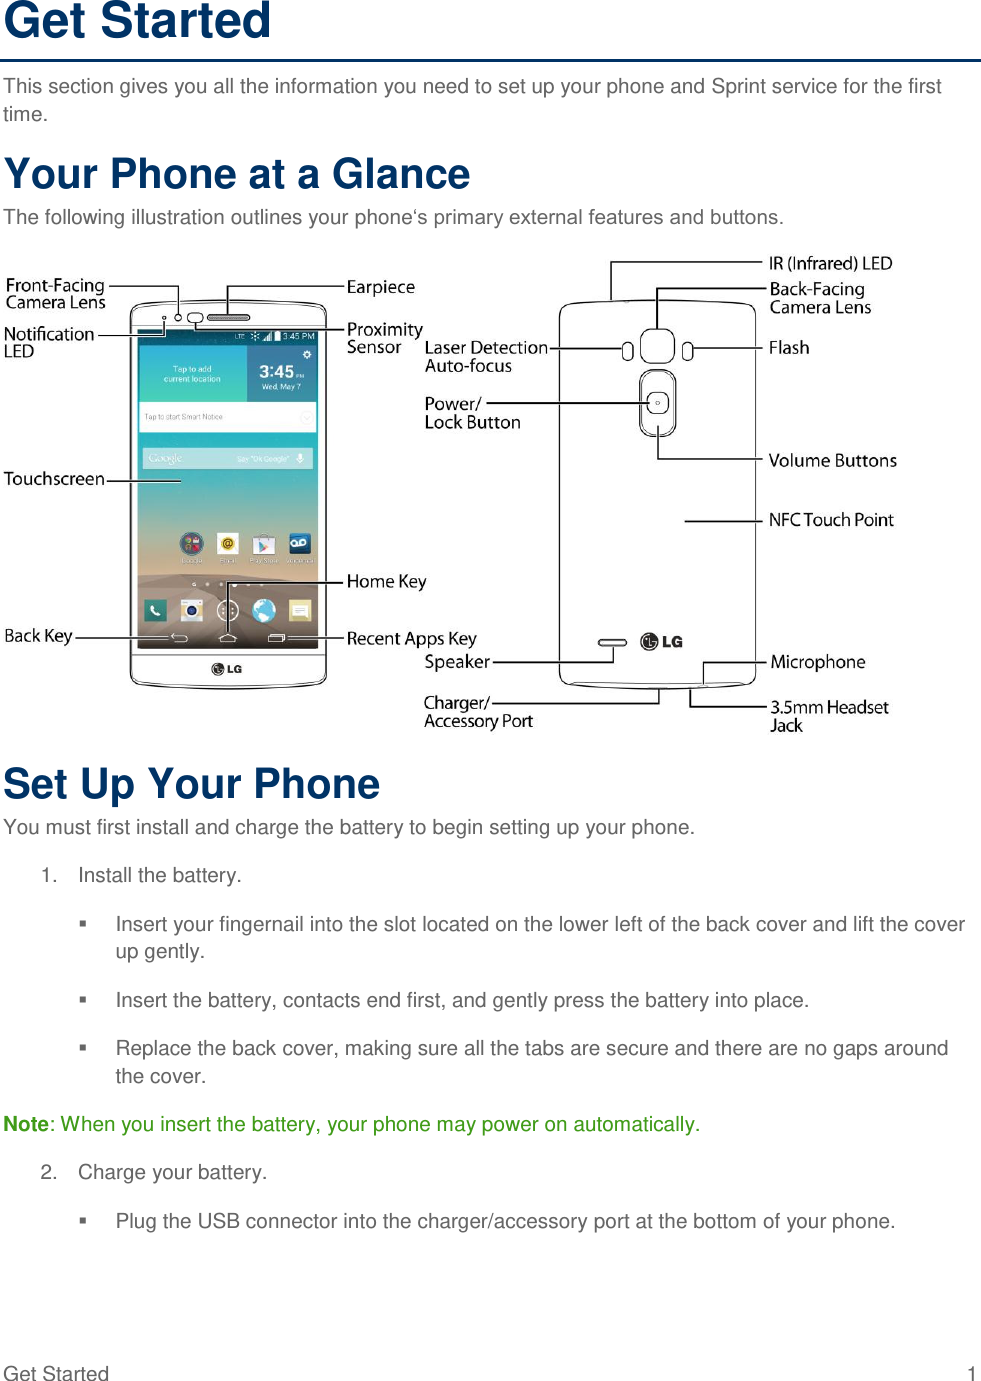 Get Started  1 Get Started This section gives you all the information you need to set up your phone and Sprint service for the first time. Your Phone at a Glance The following illustration outlines your phone‗s primary external features and buttons.  Set Up Your Phone You must first install and charge the battery to begin setting up your phone. 1.  Install the battery.   Insert your fingernail into the slot located on the lower left of the back cover and lift the cover up gently.   Insert the battery, contacts end first, and gently press the battery into place.   Replace the back cover, making sure all the tabs are secure and there are no gaps around the cover. Note: When you insert the battery, your phone may power on automatically. 2.  Charge your battery.   Plug the USB connector into the charger/accessory port at the bottom of your phone. 